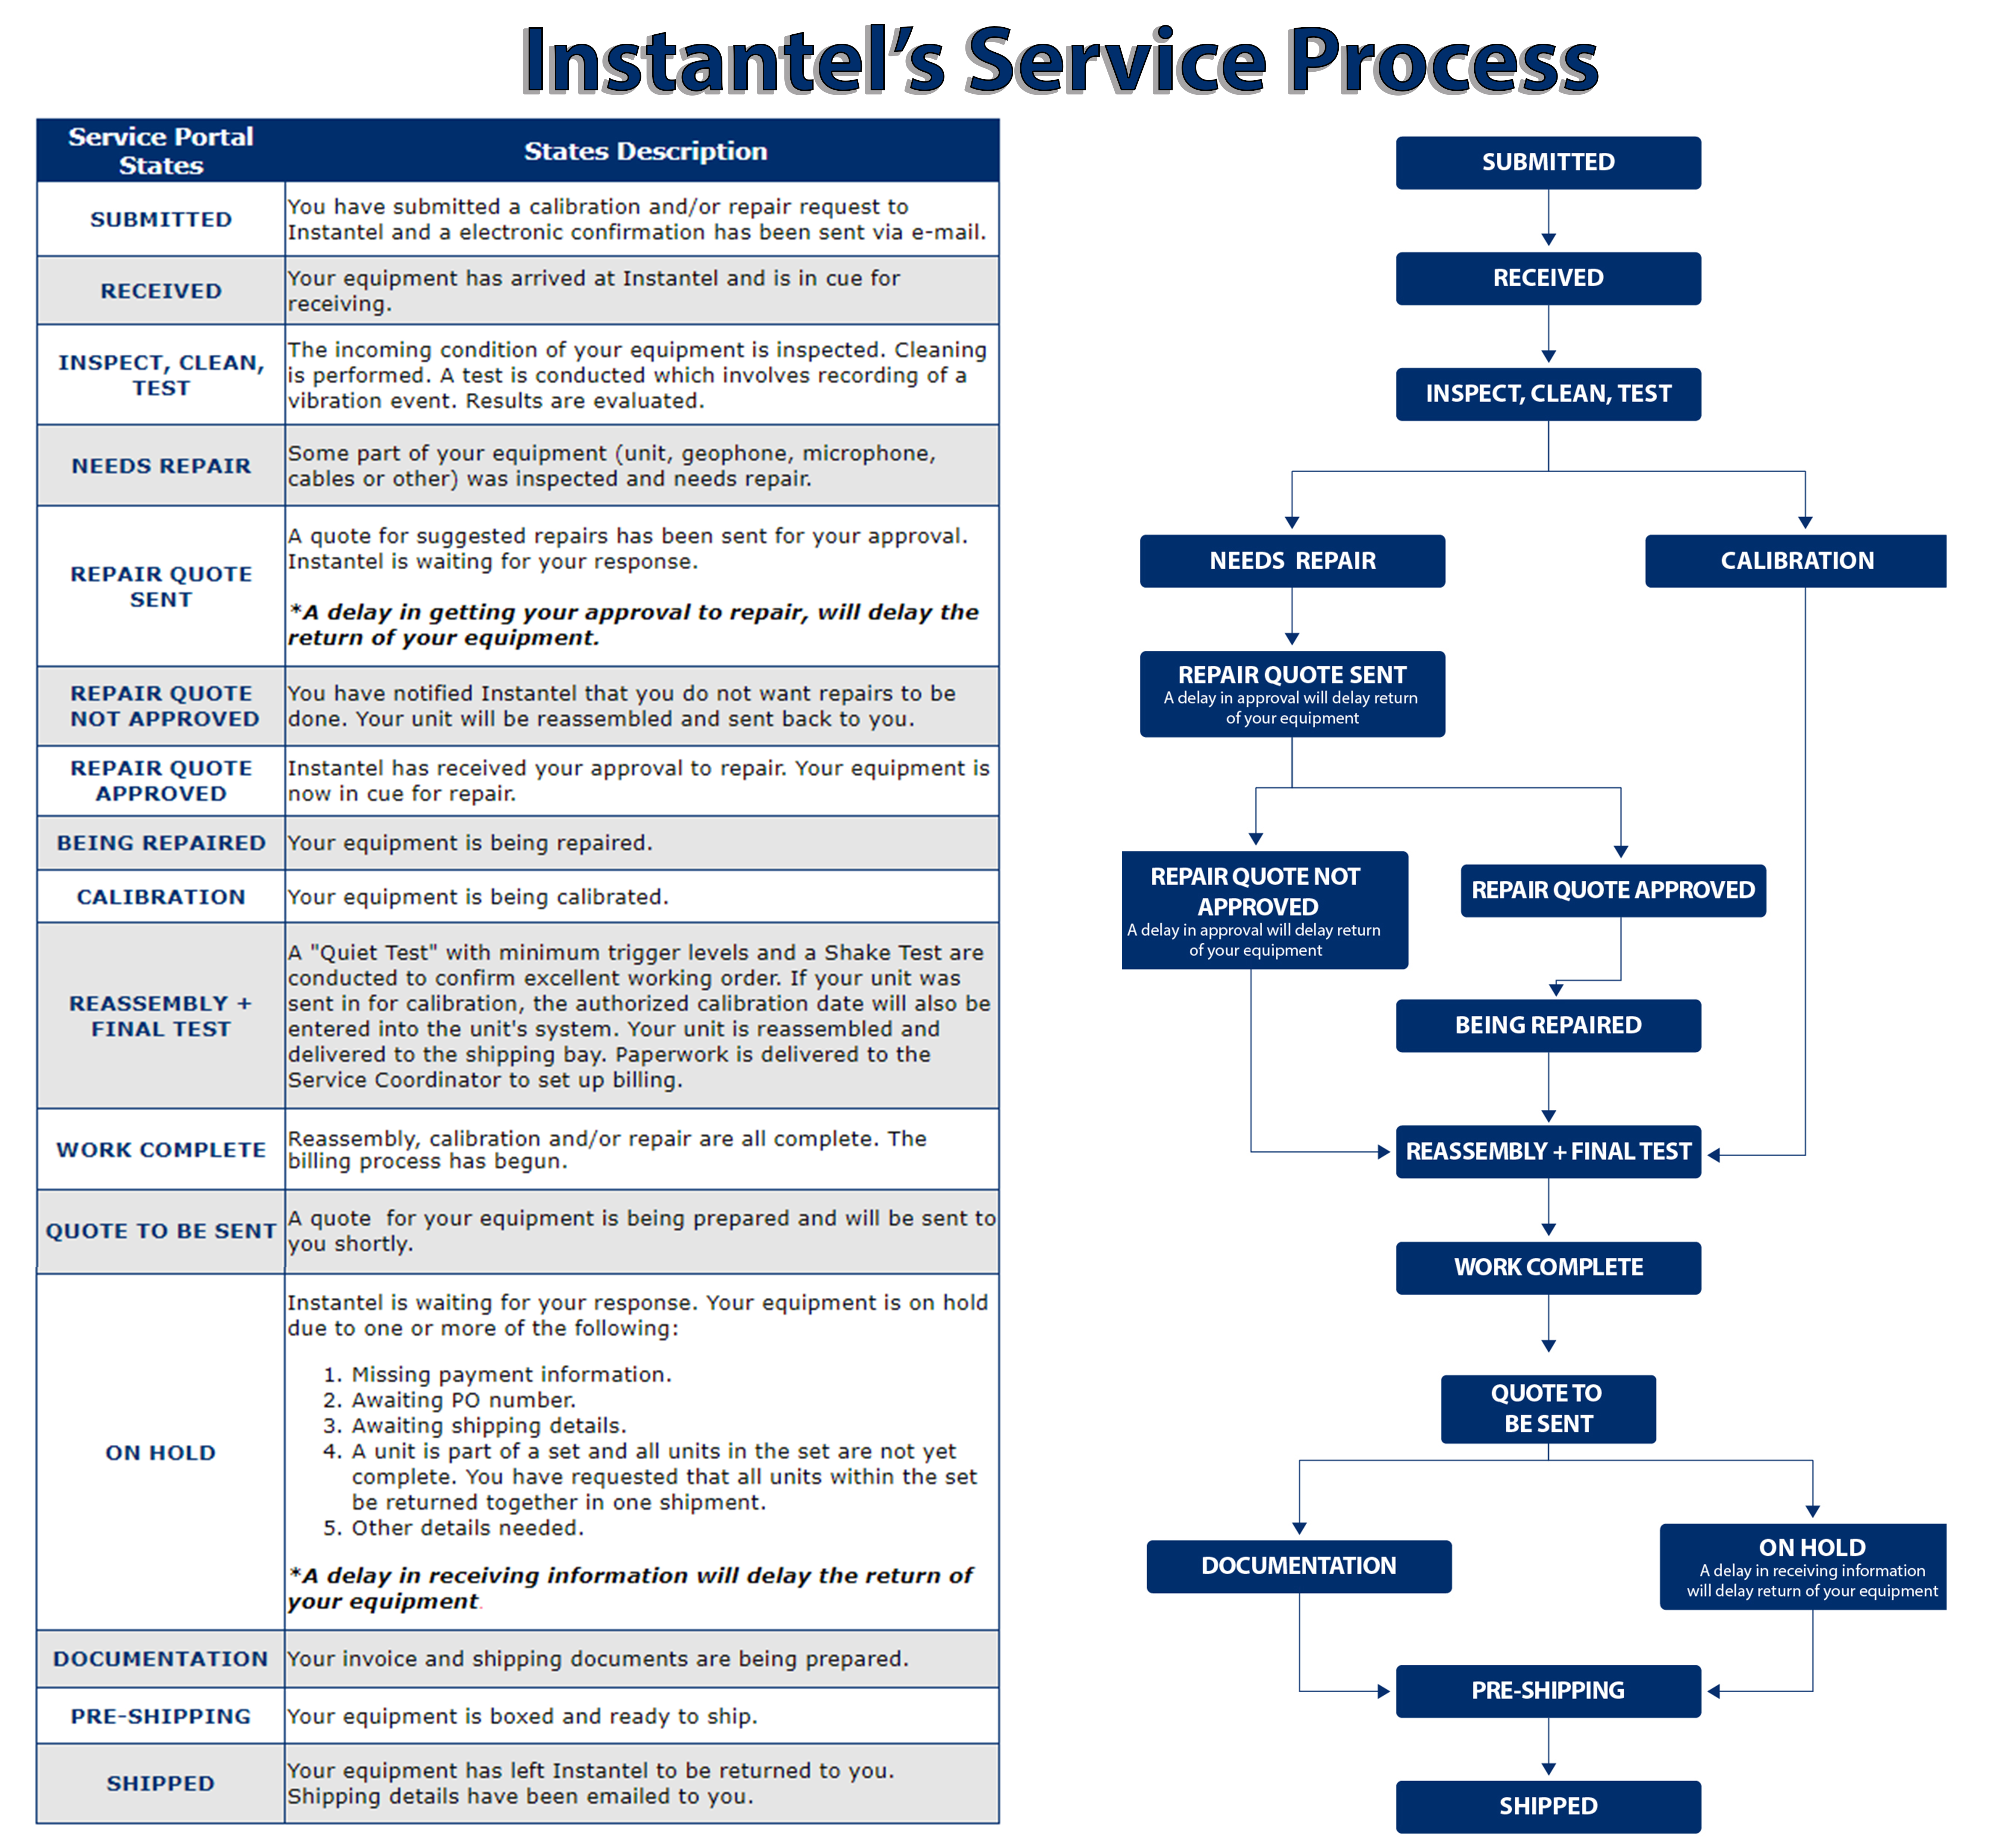 Instantel Service and Calibration